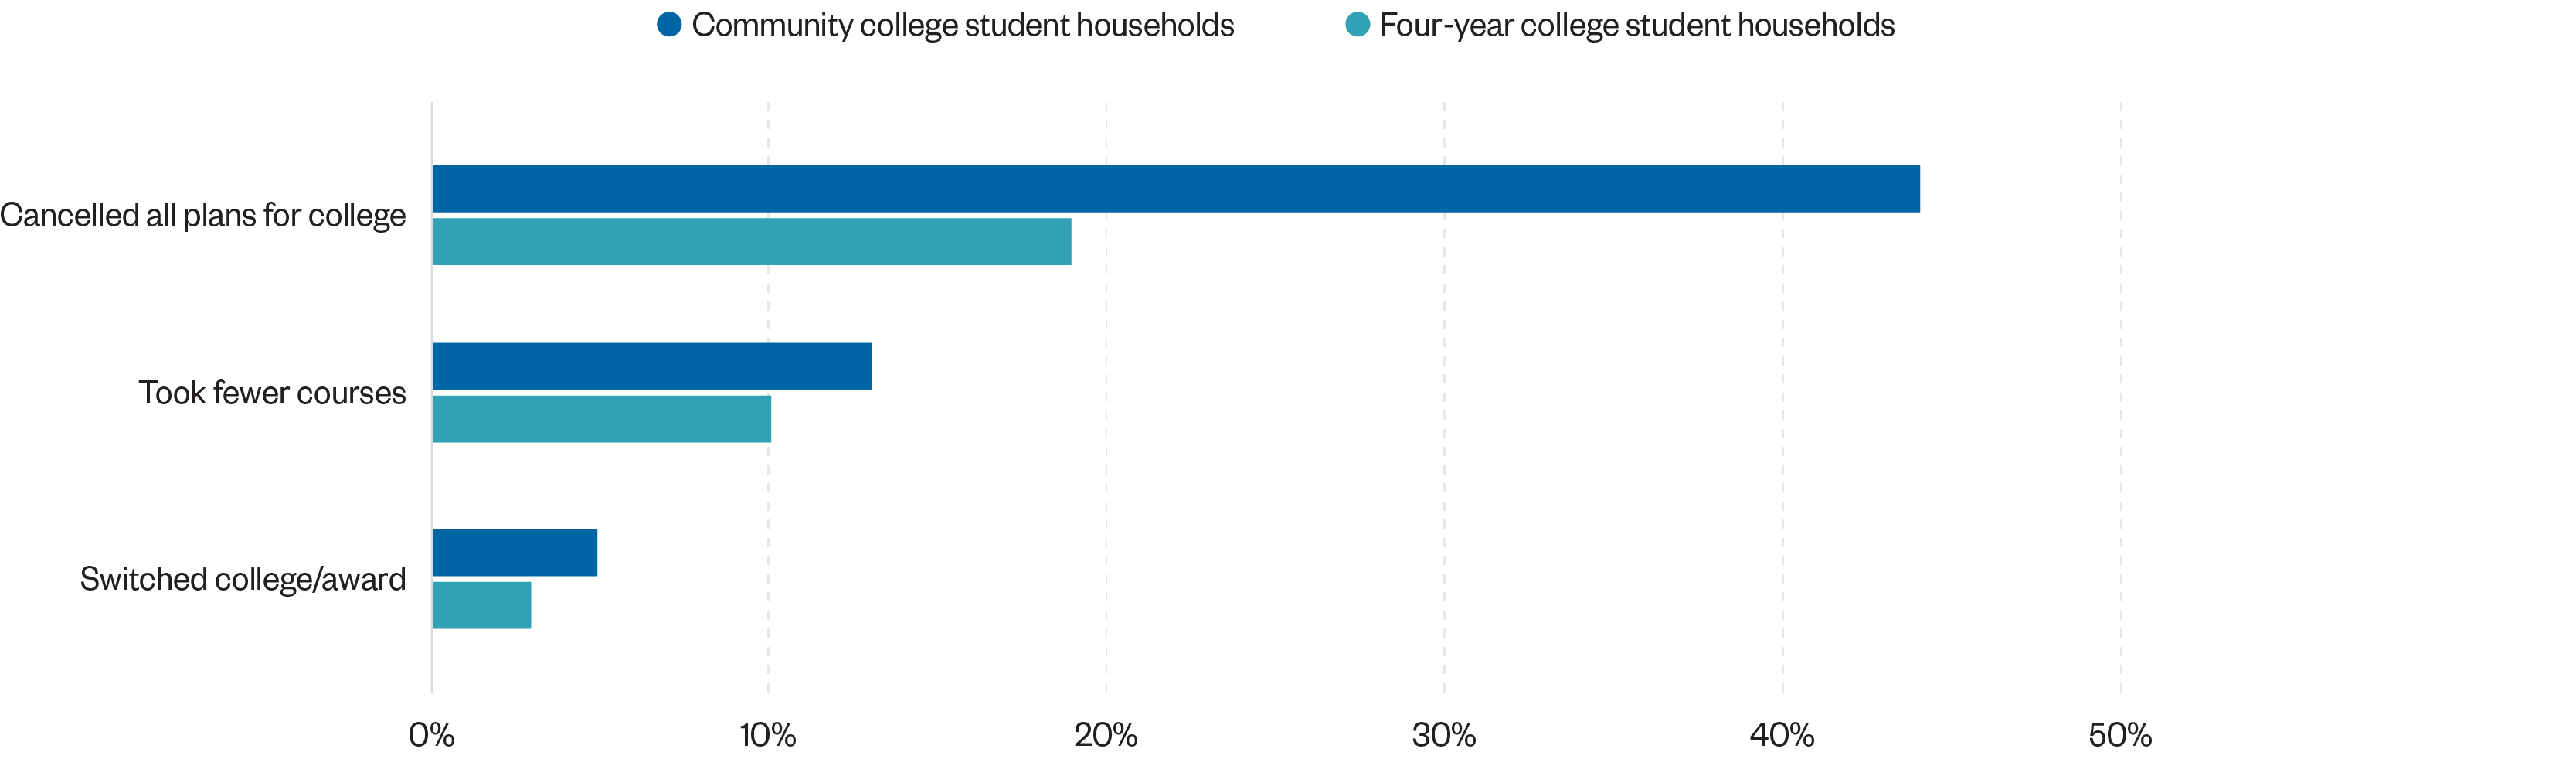 A graph showing that a significant portion of community college students cancelled their college plans